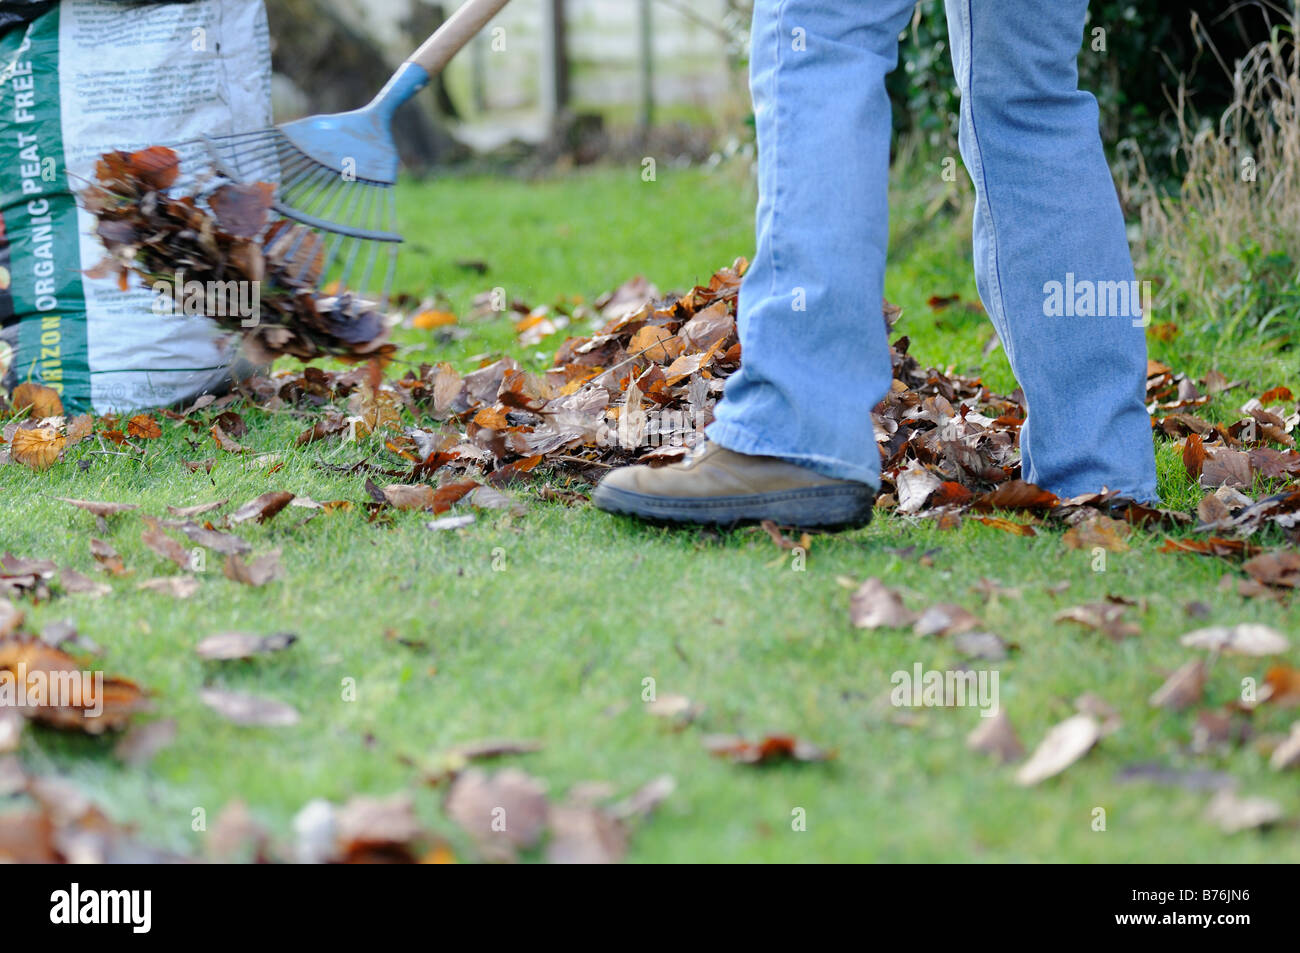 Gardener raking leaves on lawn prior to collecting to make into compost in plastic sack December Stock Photo